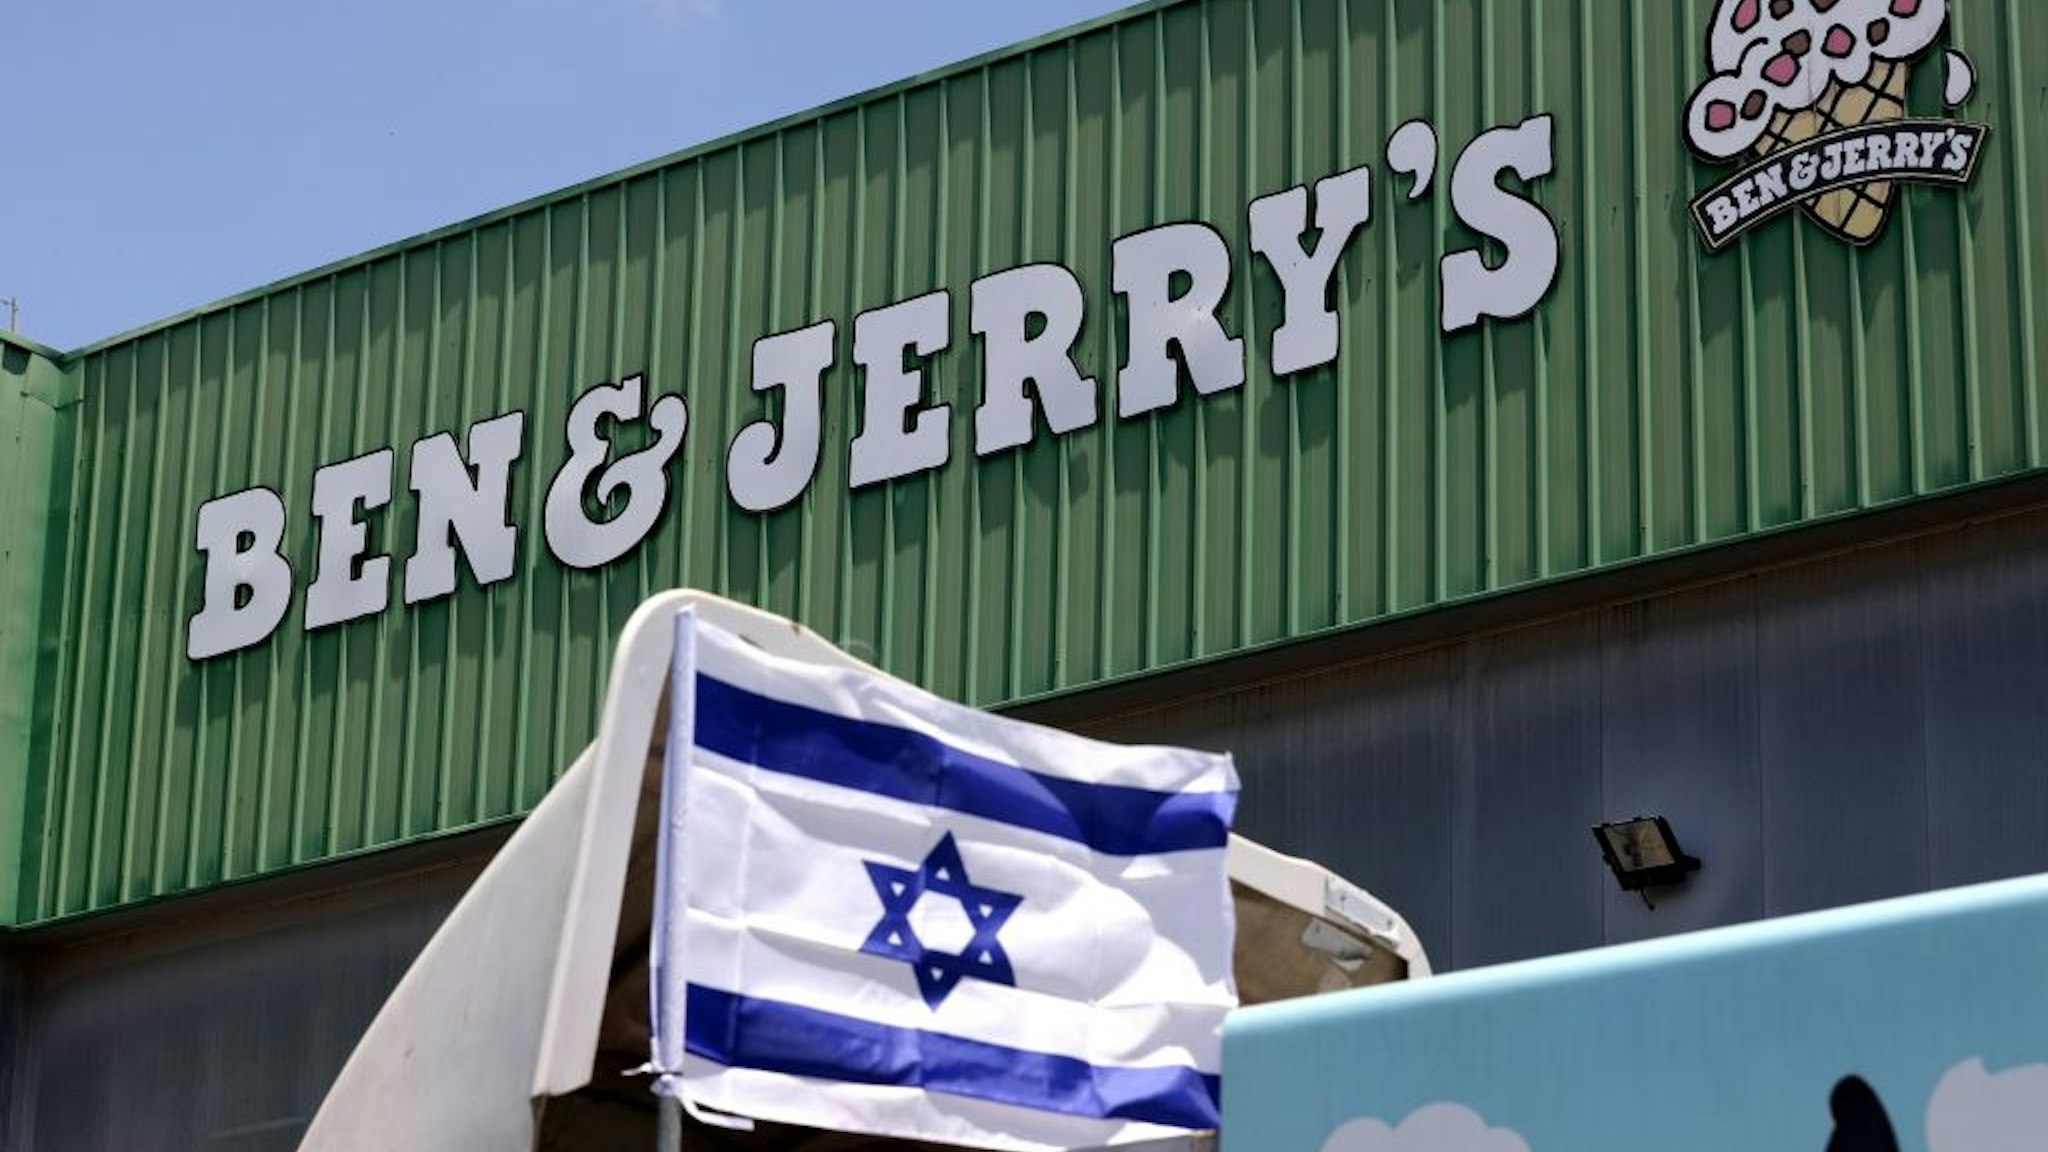 An Israeli flag is set atop a delivery truck outside US ice-cream maker Ben &amp; Jerry's factory in Be'er Tuvia, on July 21, 2021. - Ben &amp; Jerry's announced that it will stop selling ice cream in the Israel-occupied Palestinian territories since it was "inconsistent with our values", although it said it planned to keep selling its products in Israel. The West Bank and East Jerusalem have been under Israeli control since 1967. Roughly 475,000 Jewish settlers live in the West Bank, in communities widely regarded as illegal under international law, alongside some 2.8 million Palestinians. (Photo by Emmanuel DUNAND / AFP) (Photo by EMMANUEL DUNAND/AFP via Getty Images)